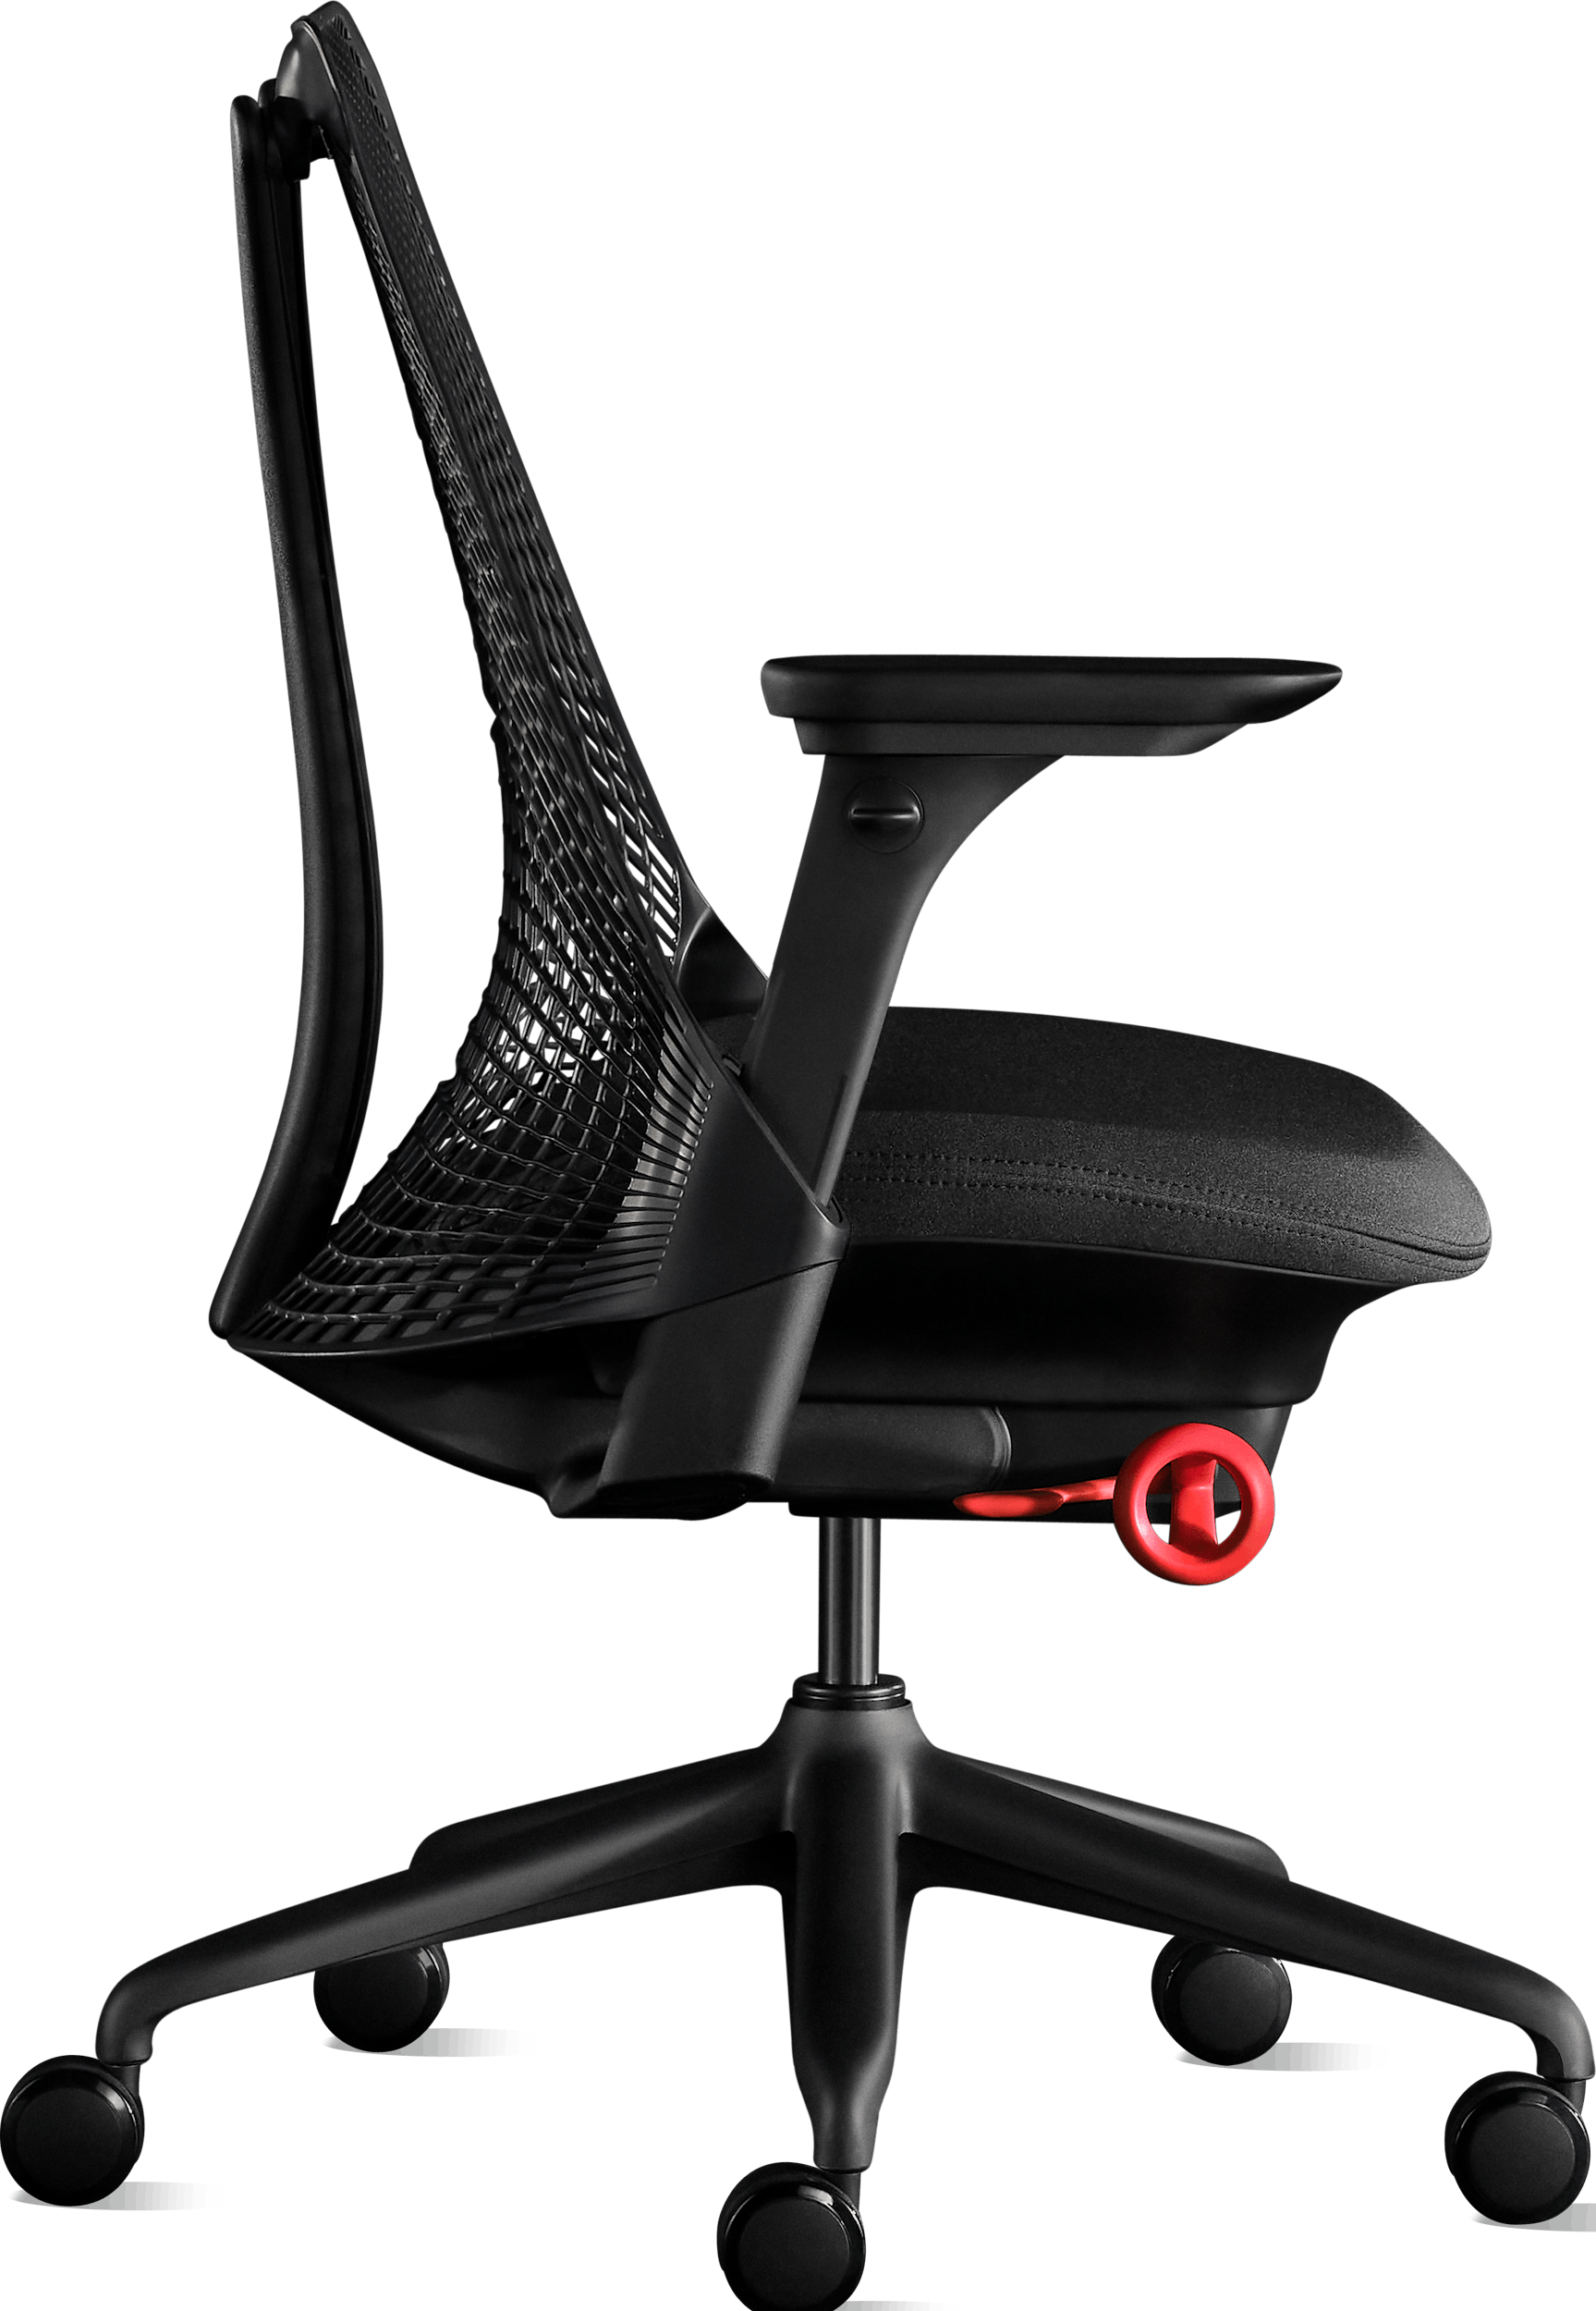 This cheap gaming chair has become my ultimate WFH accessory